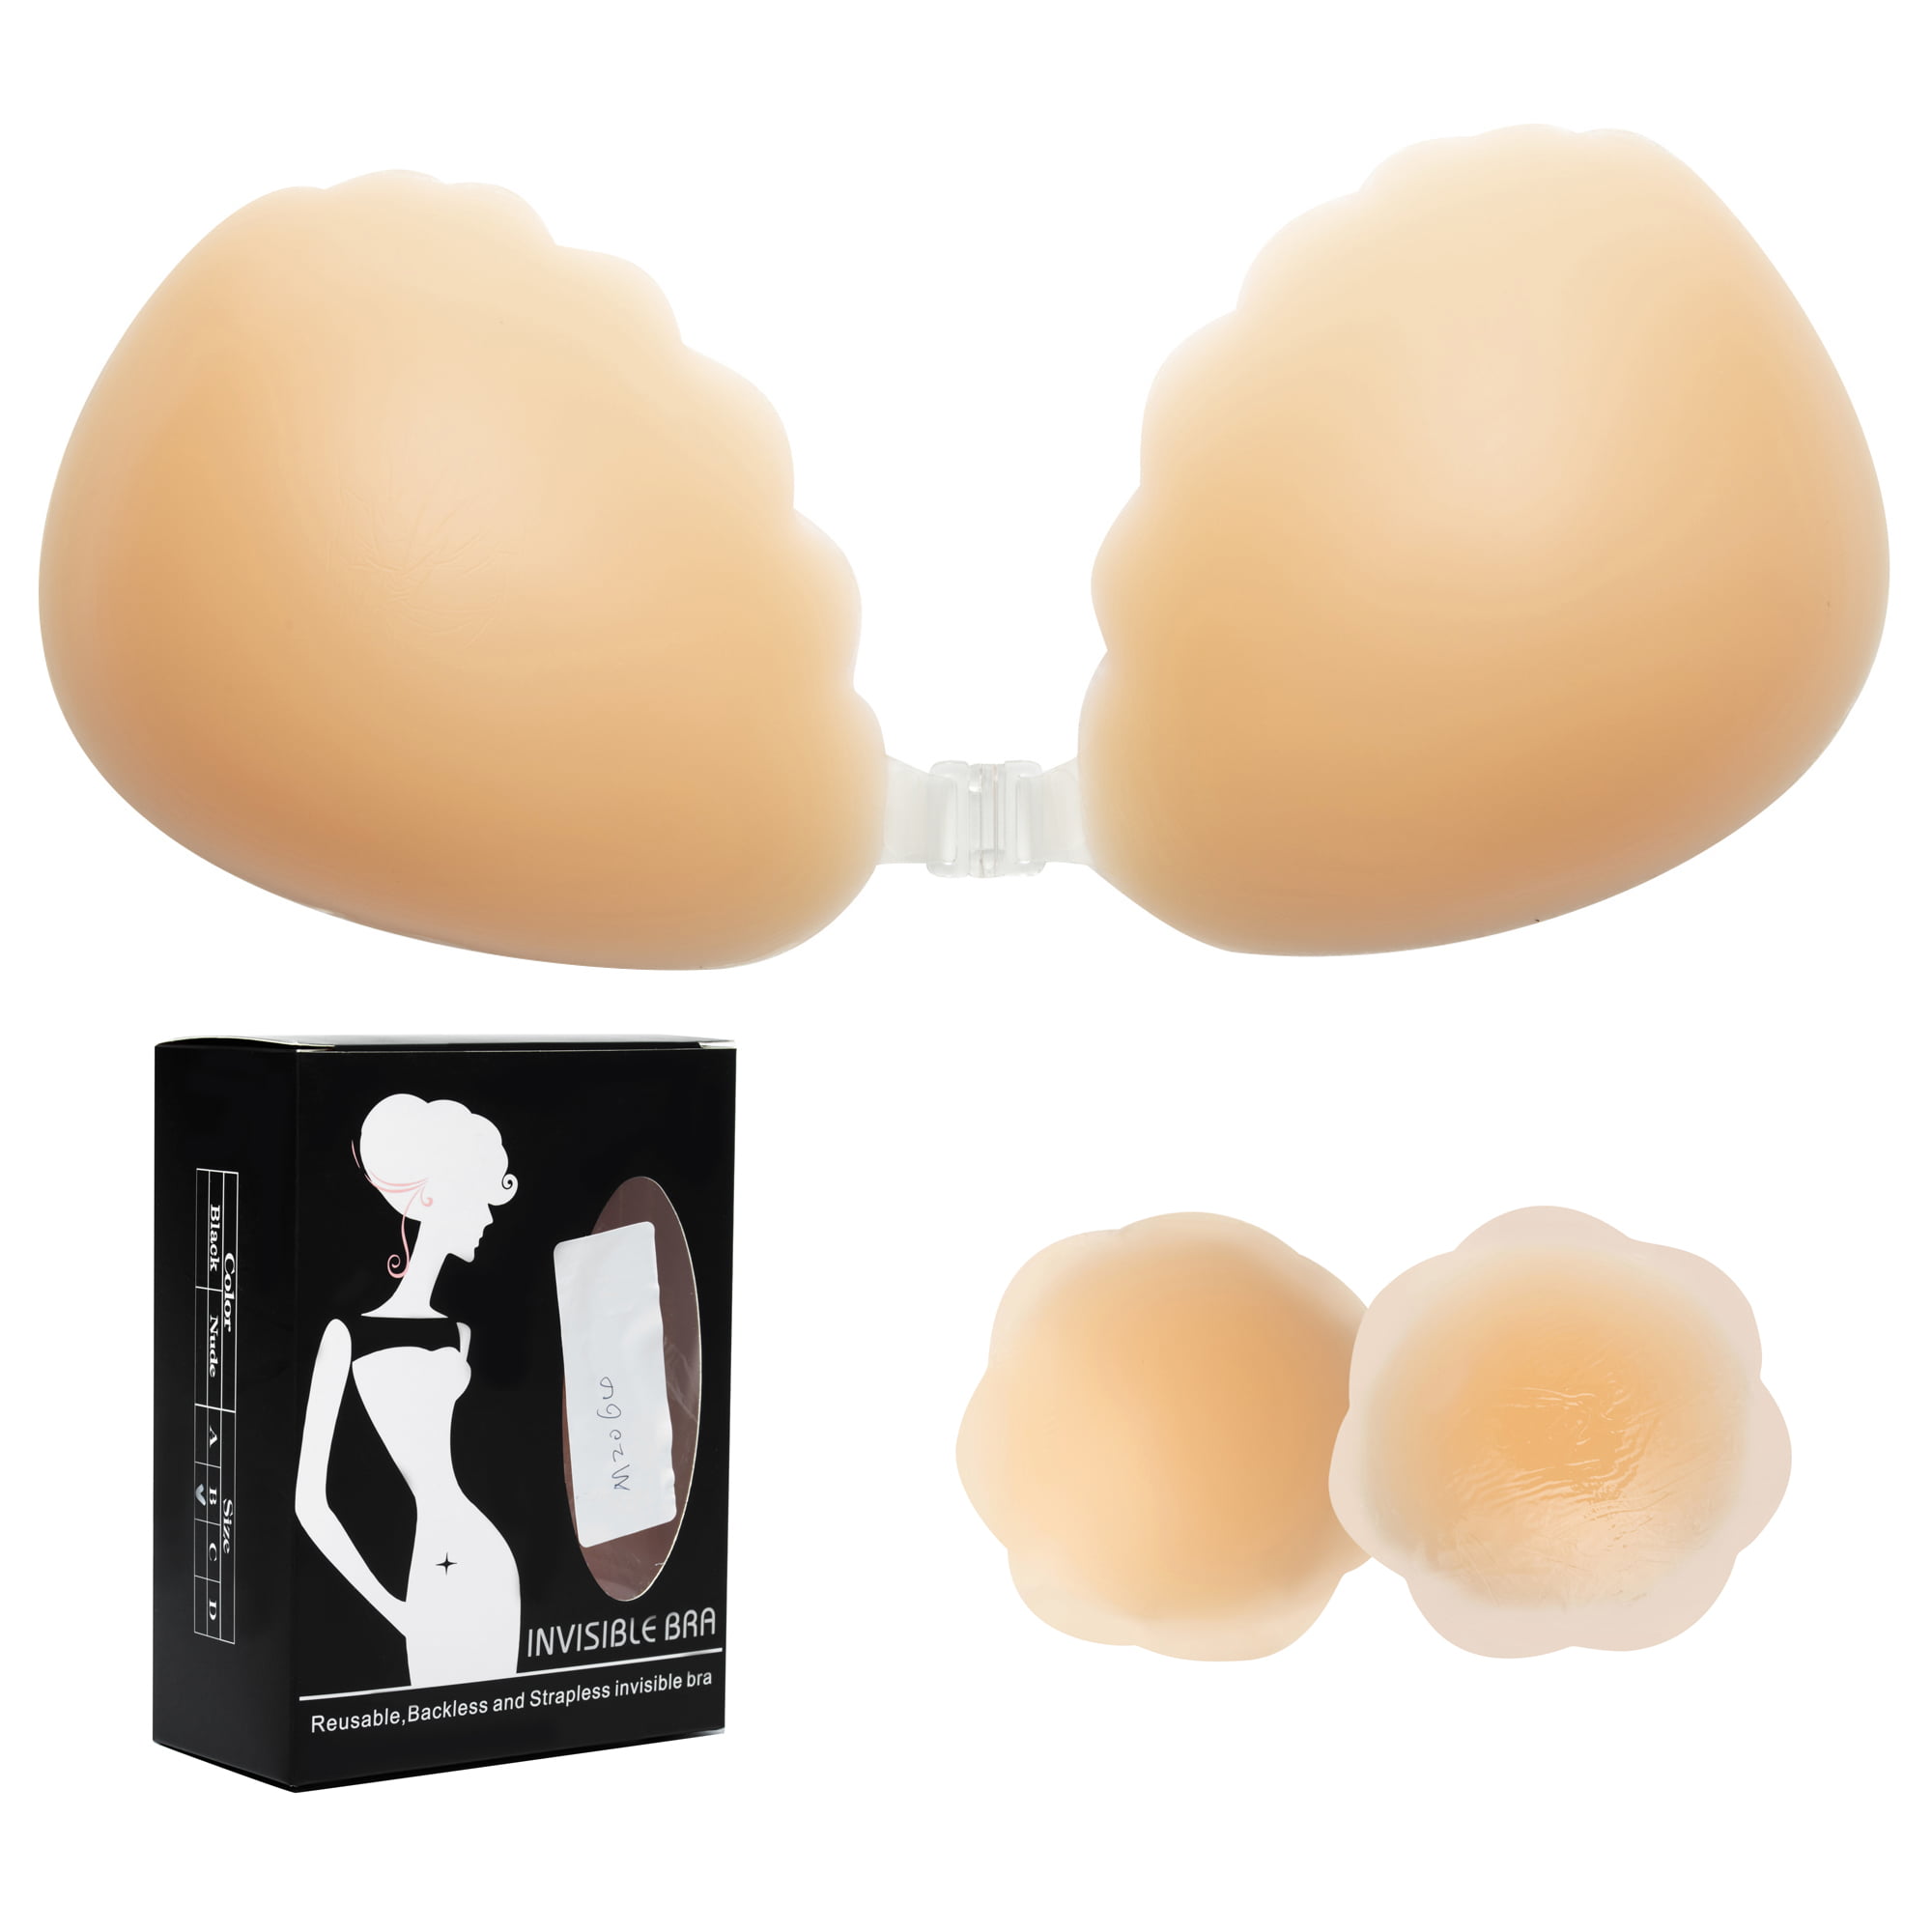 unetme Sticky Bra + Nipple Covers + Boob Tapes + Gift Box size